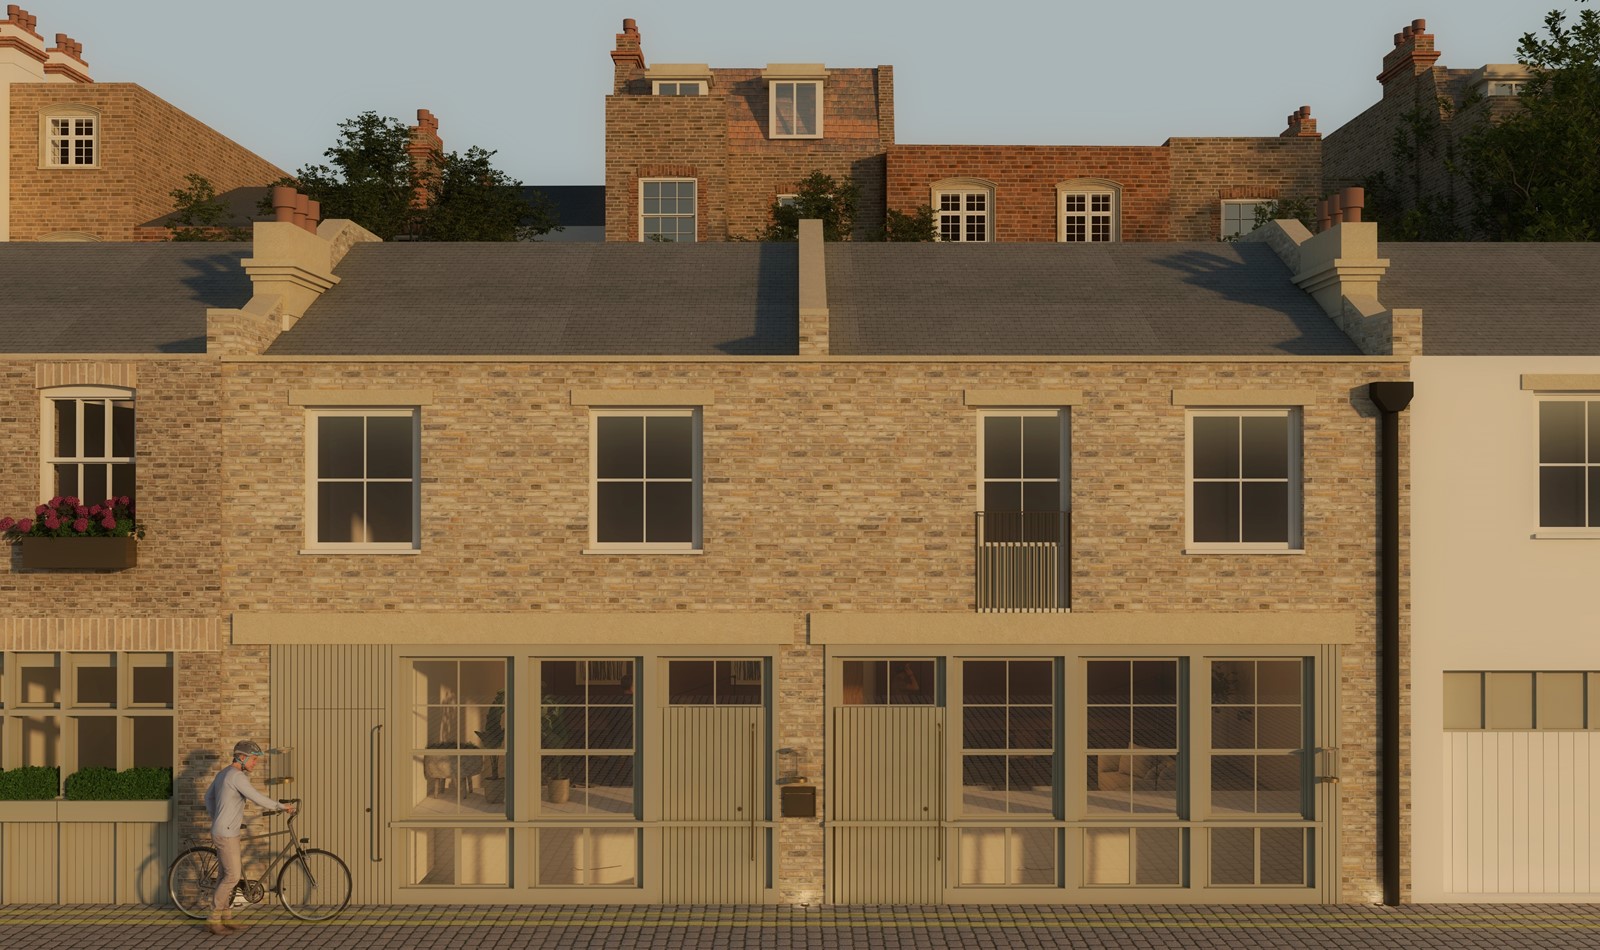 Colville Mews Front Image